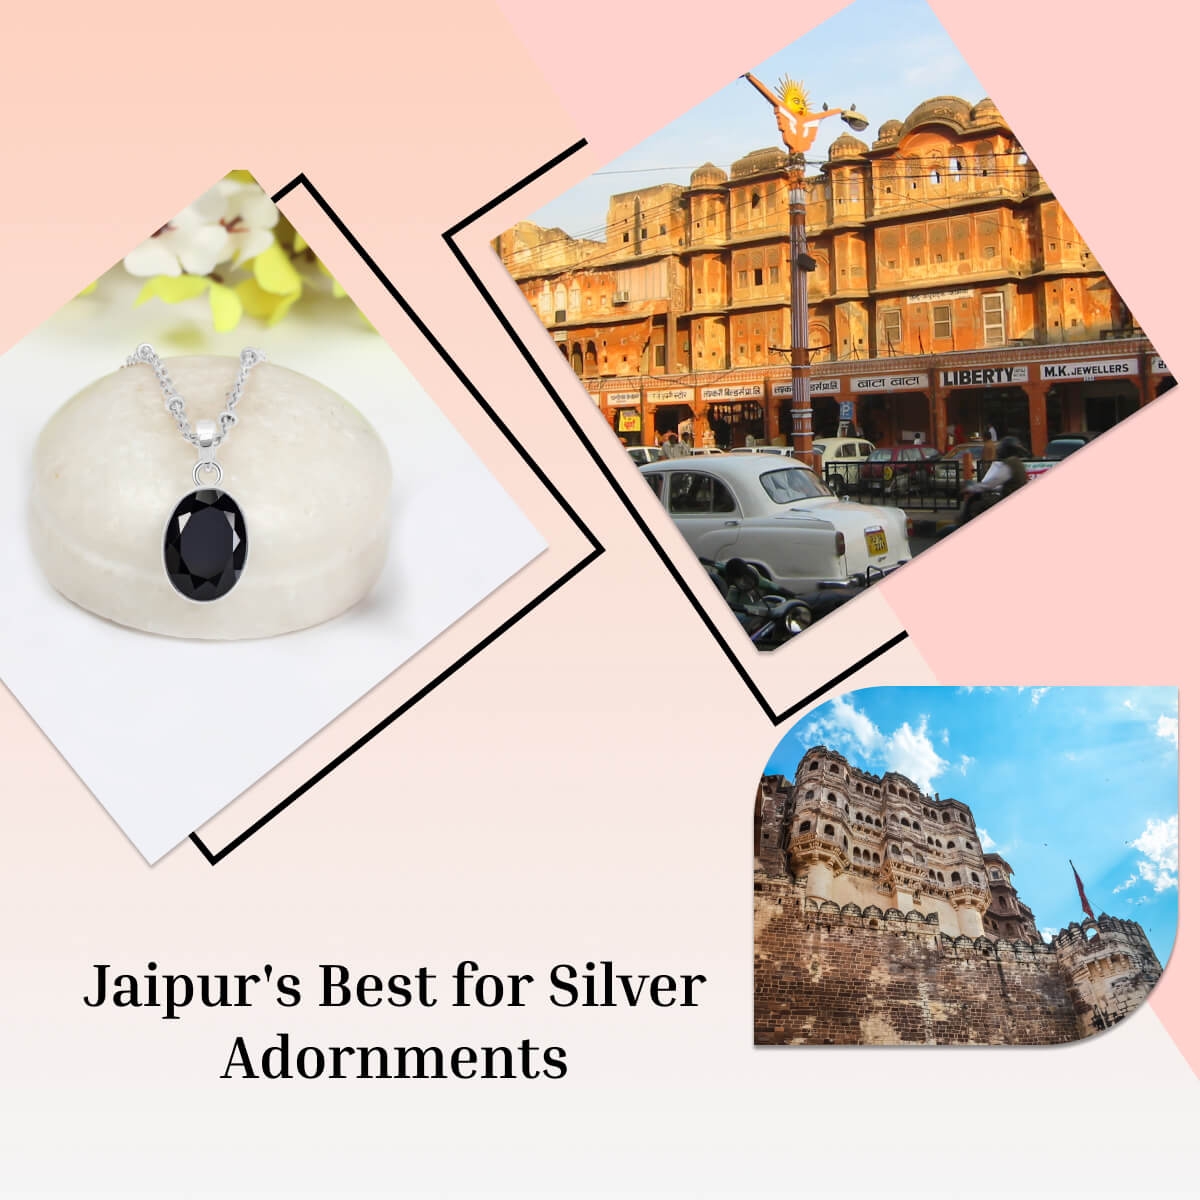 Where to buy Silver Jewelry in Jaipur